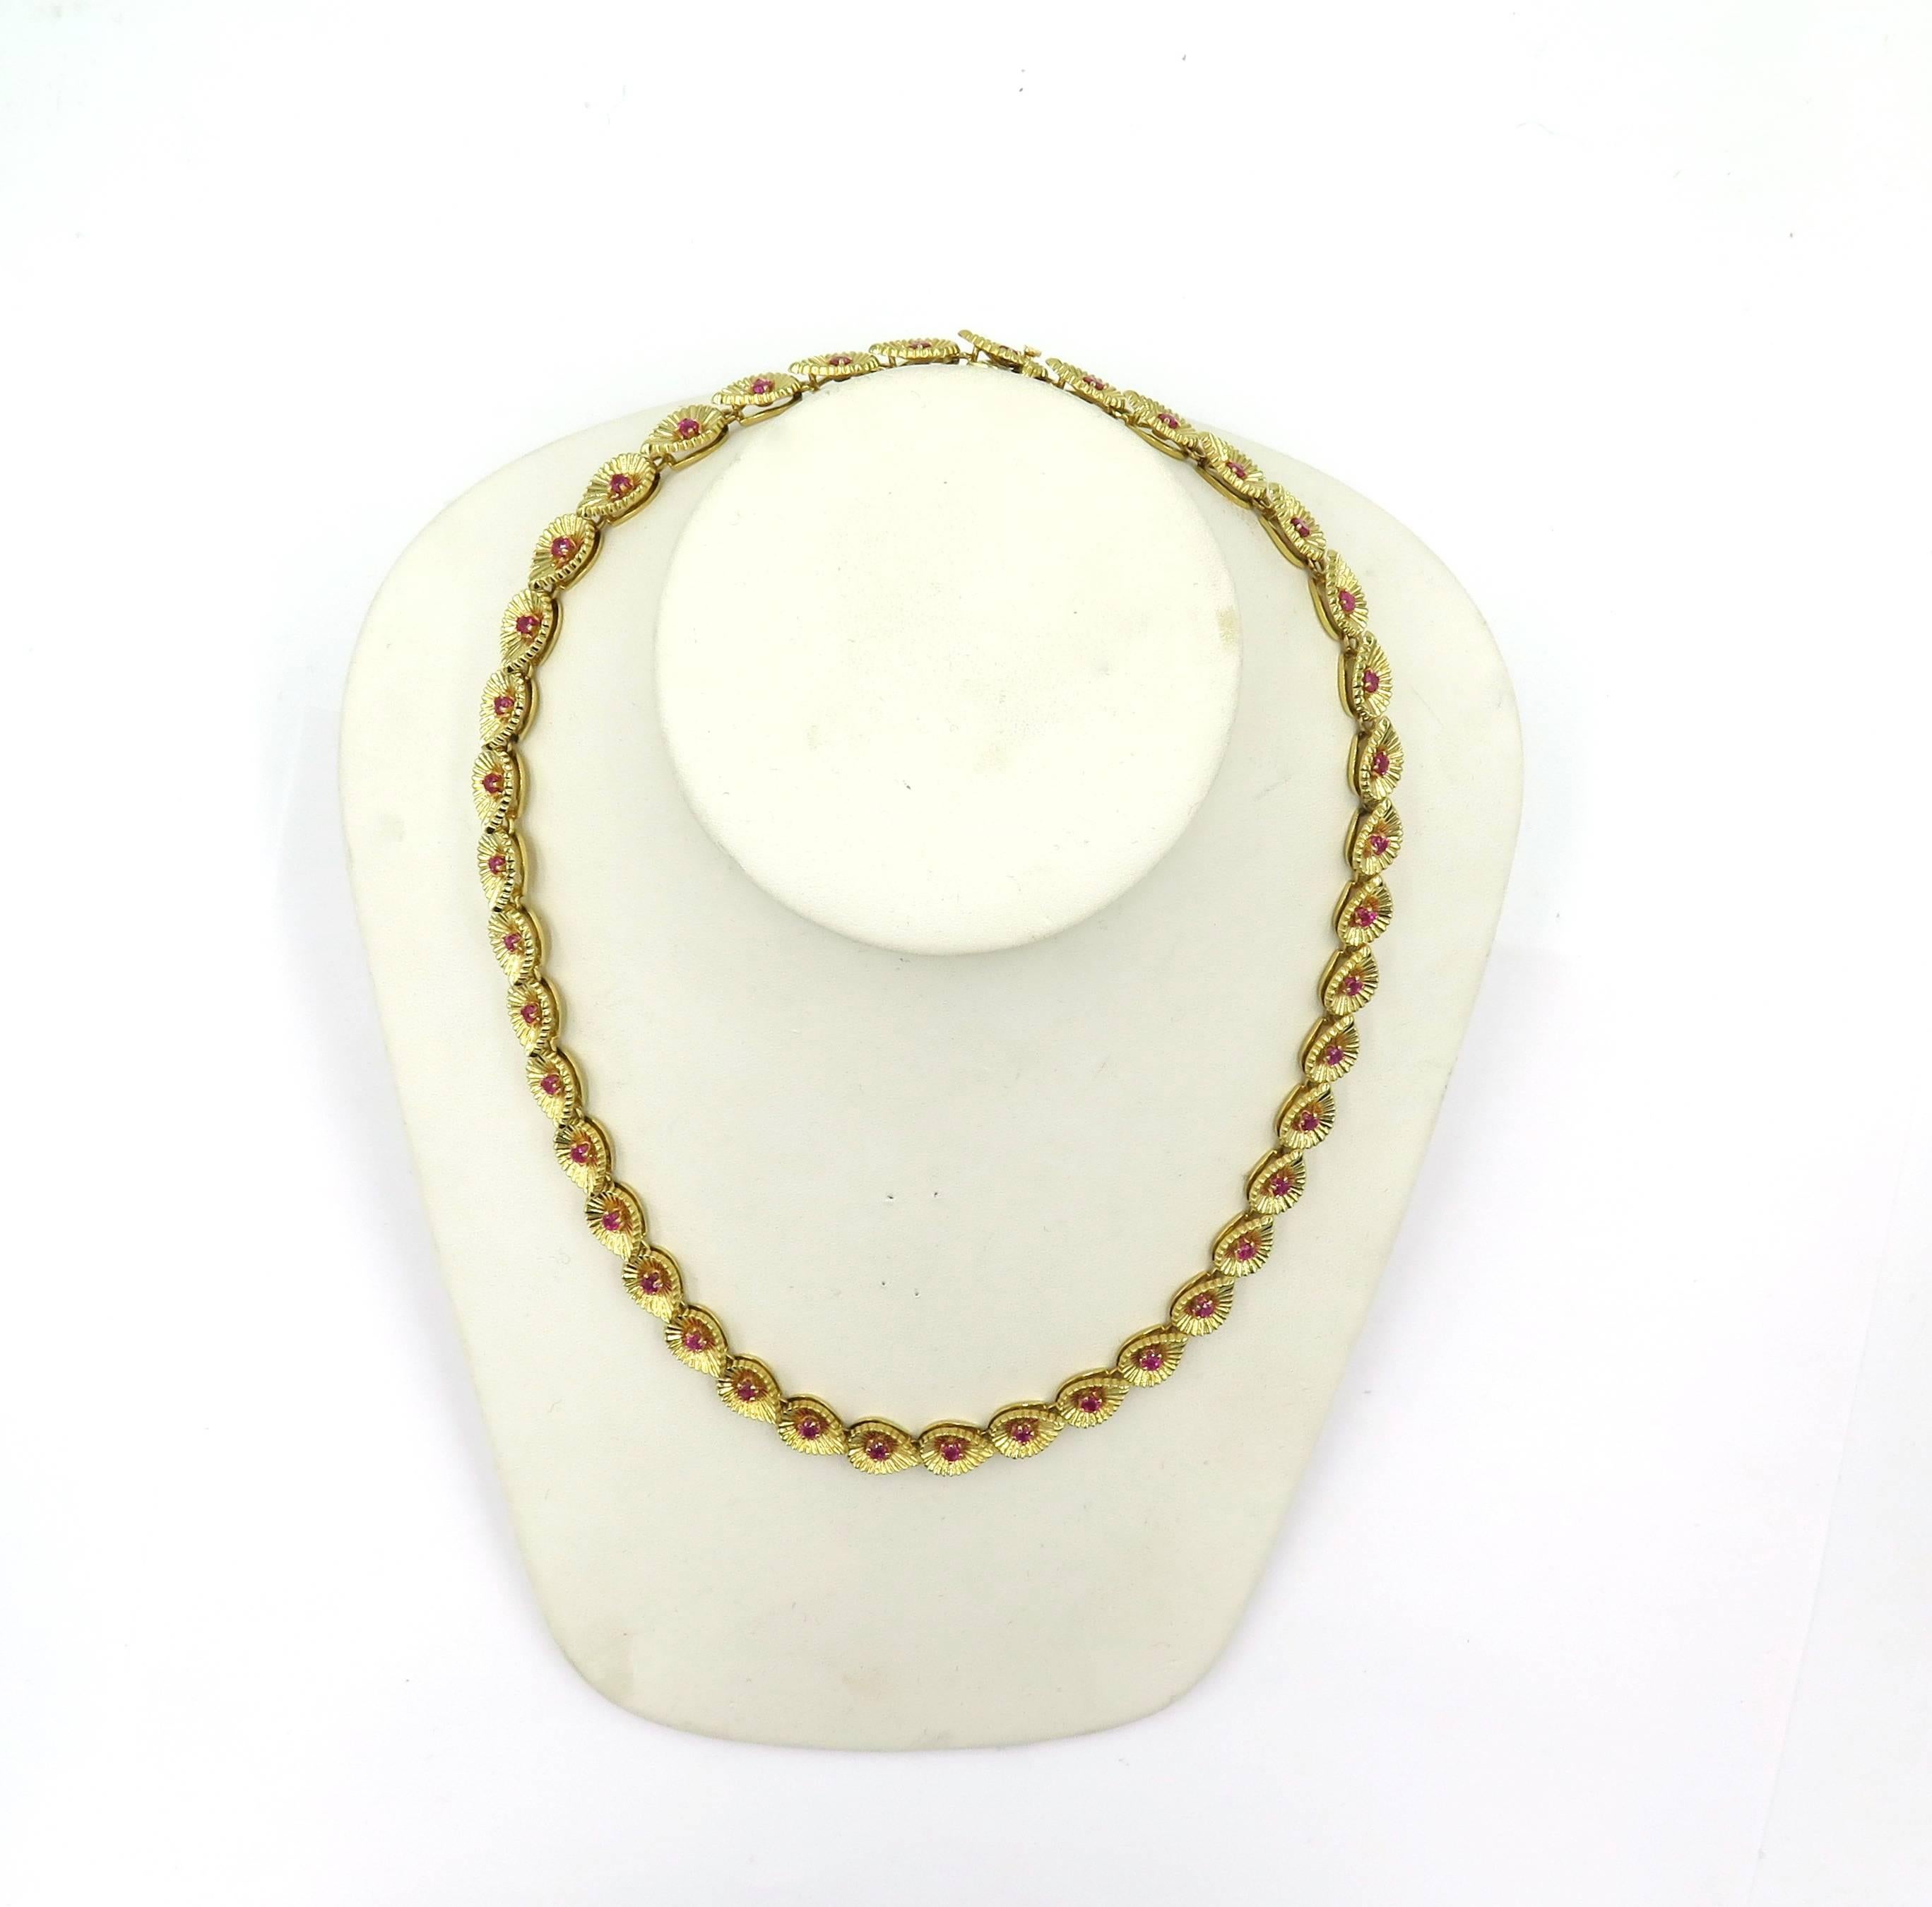 A 14 karat yellow gold and ruby necklace. Tiffany & Co. Circa 1950. Designed as a series of drop shaped fluted gold links, each centering a circular cut ruby. Length is approximately 18 inches, gross weight is approximately 63.3 grams. numbered #943.